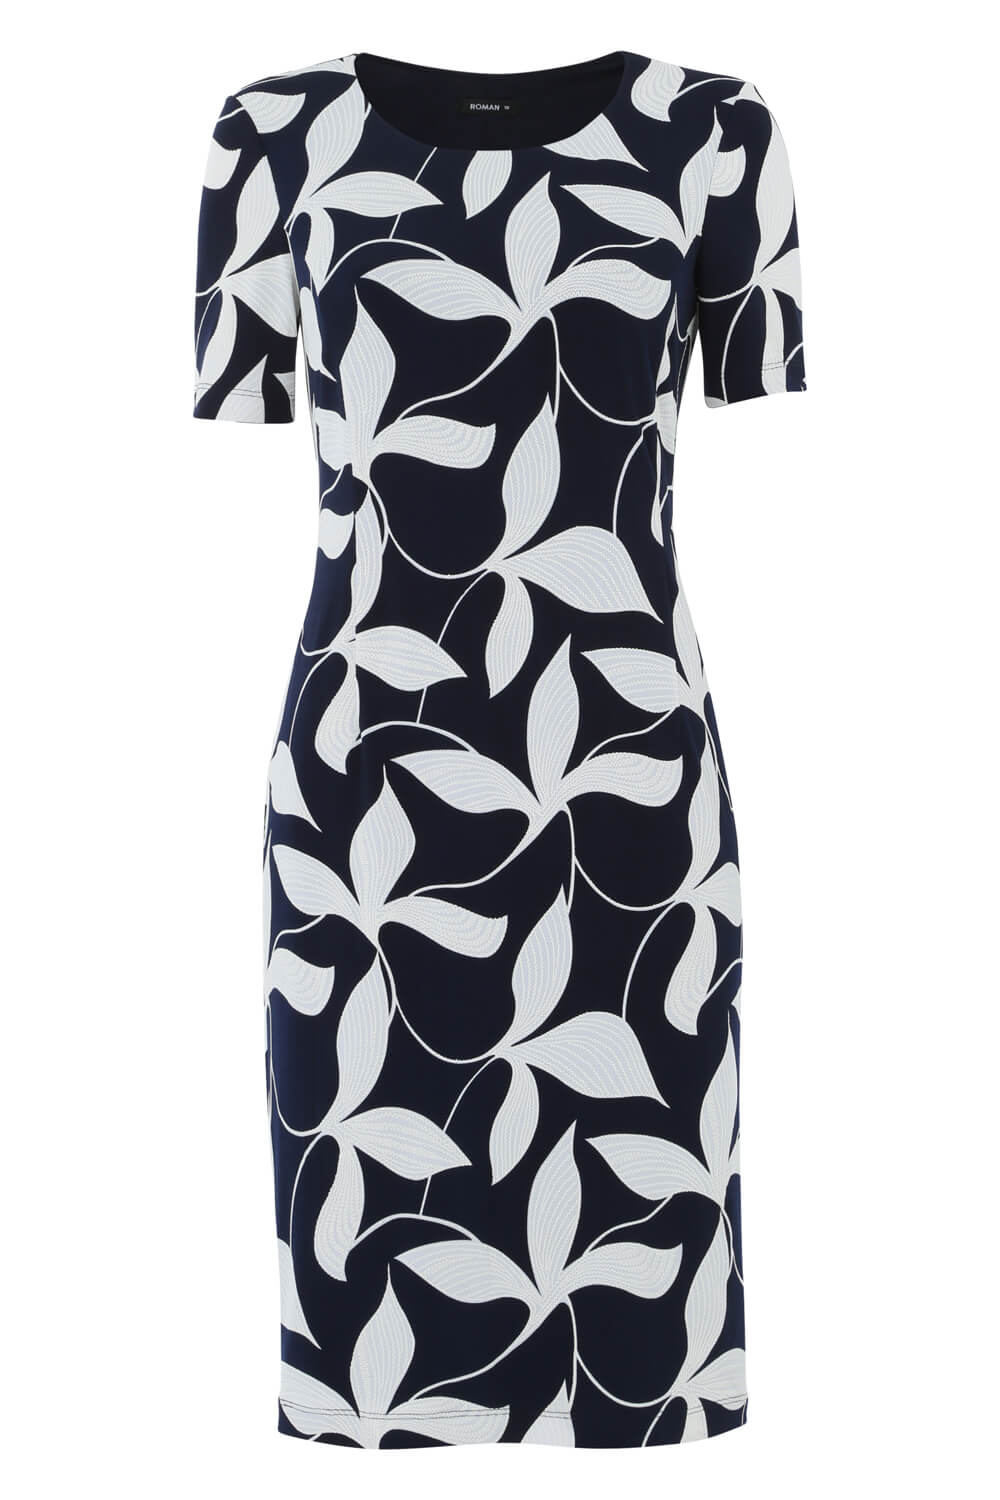  Abstract Leaf Textured Print Shift Dress, Image 4 of 4